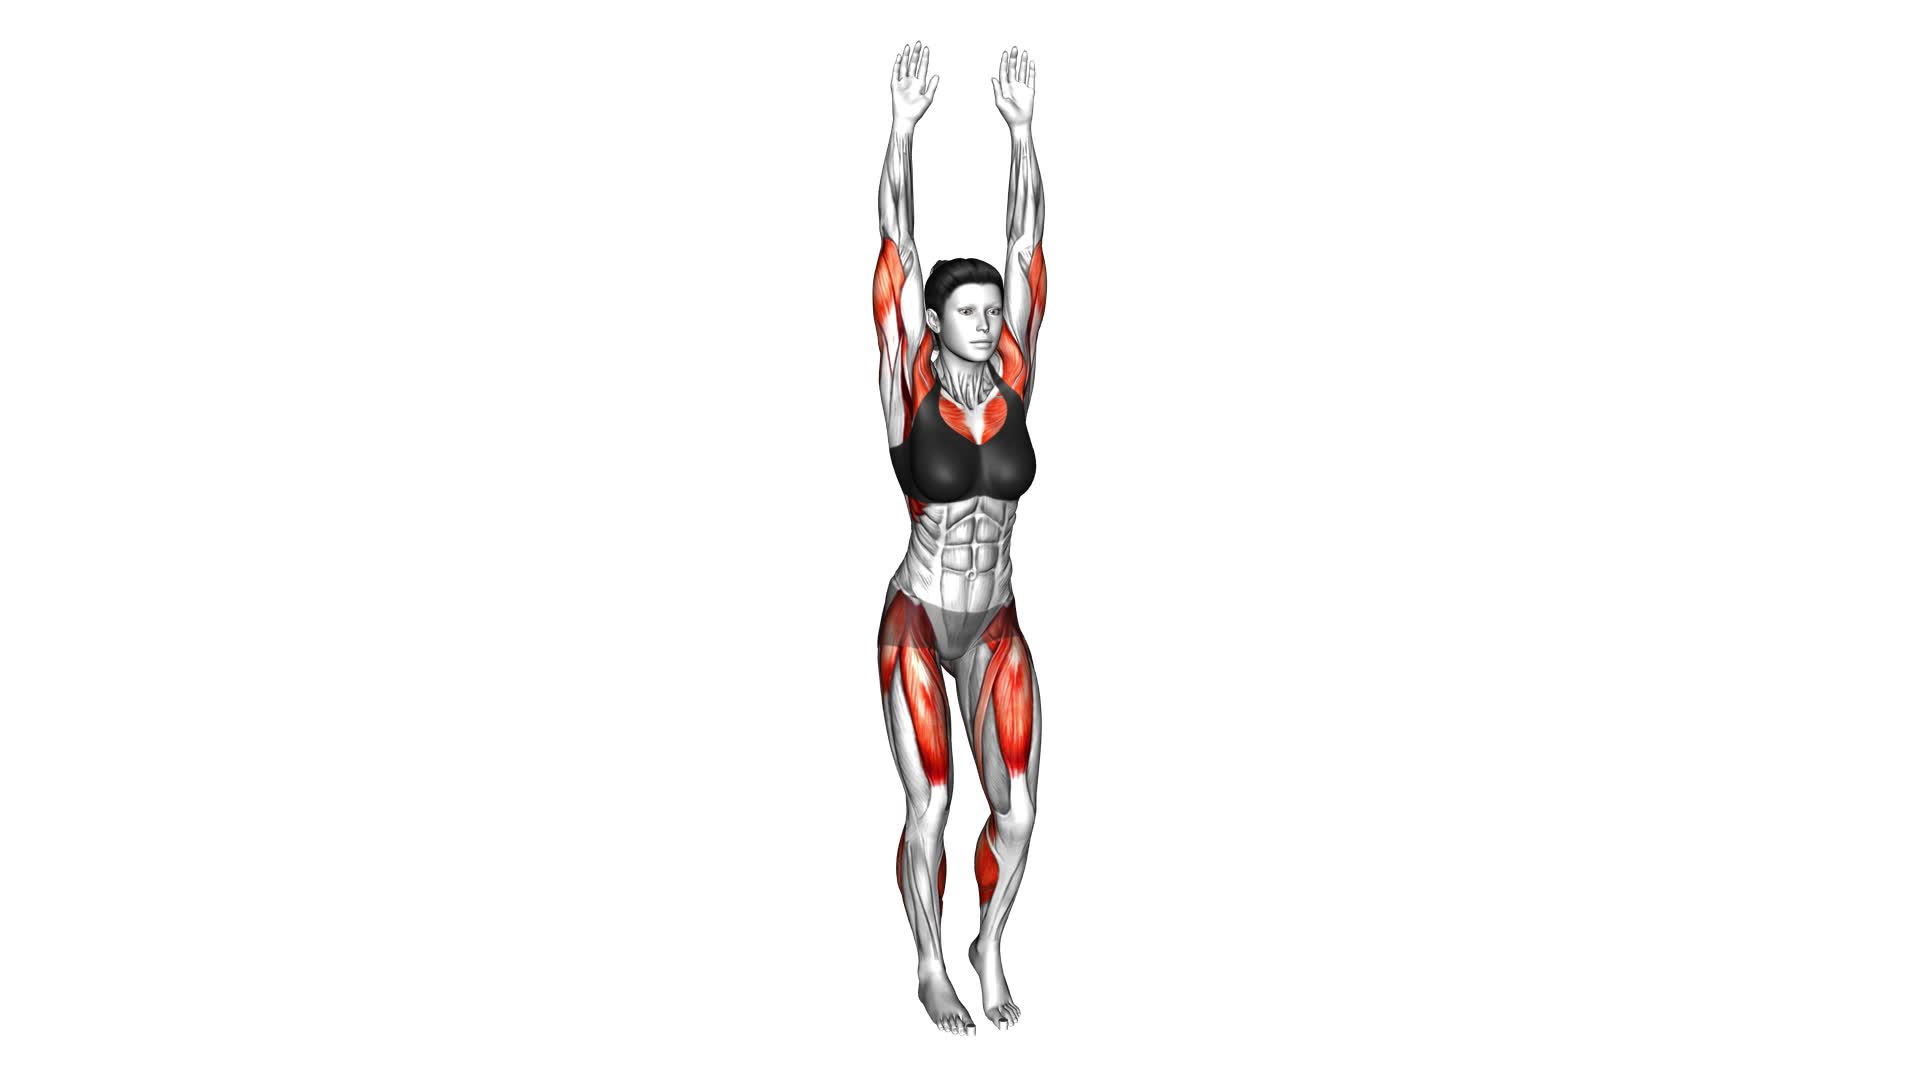 Arm Raise Step in Place (female) - Video Exercise Guide & Tips